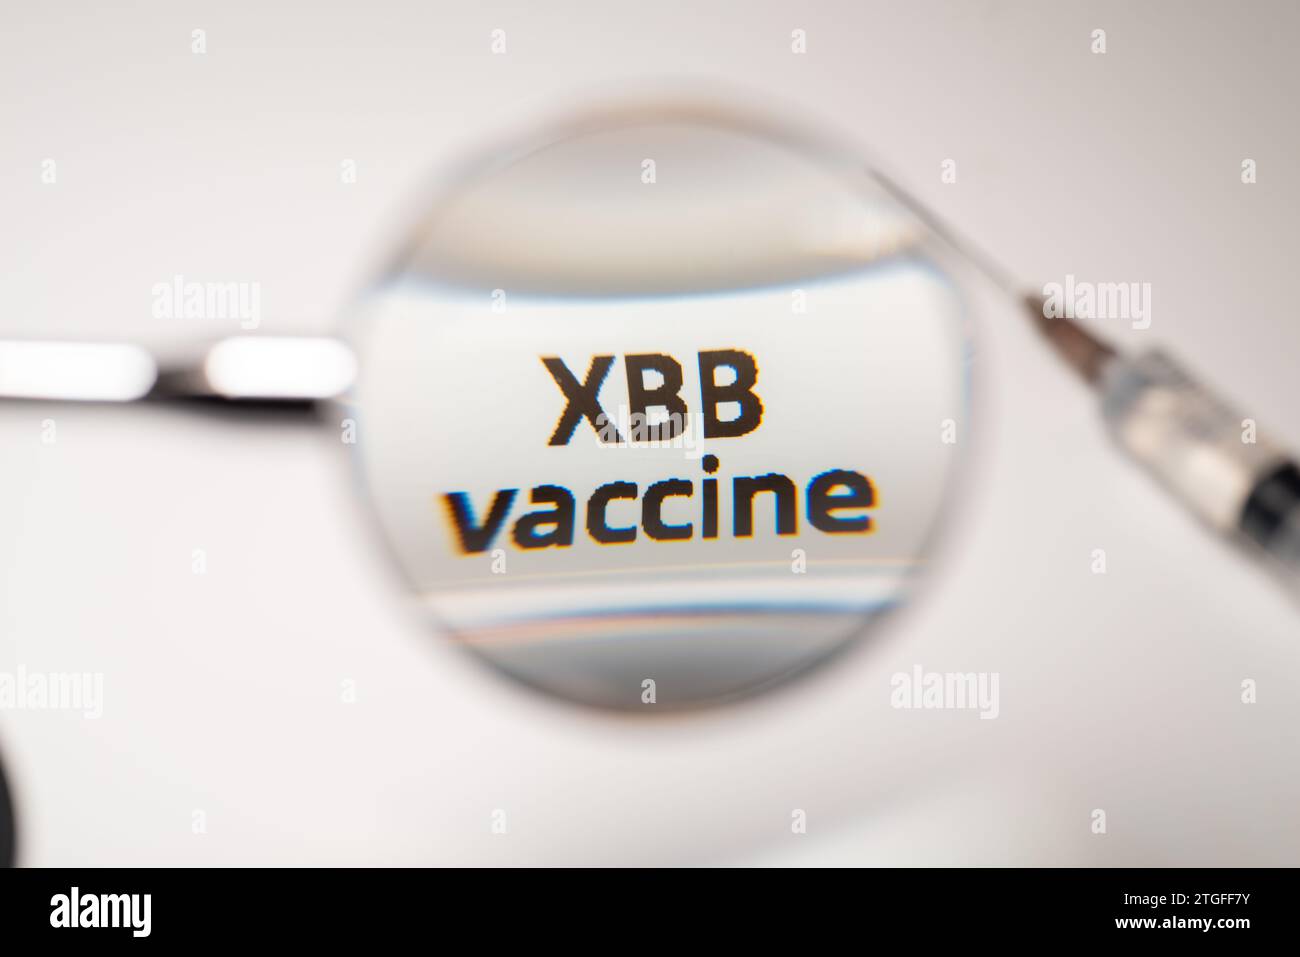 Close up of XBB vaccine vial,Medical health concept Stock Photo